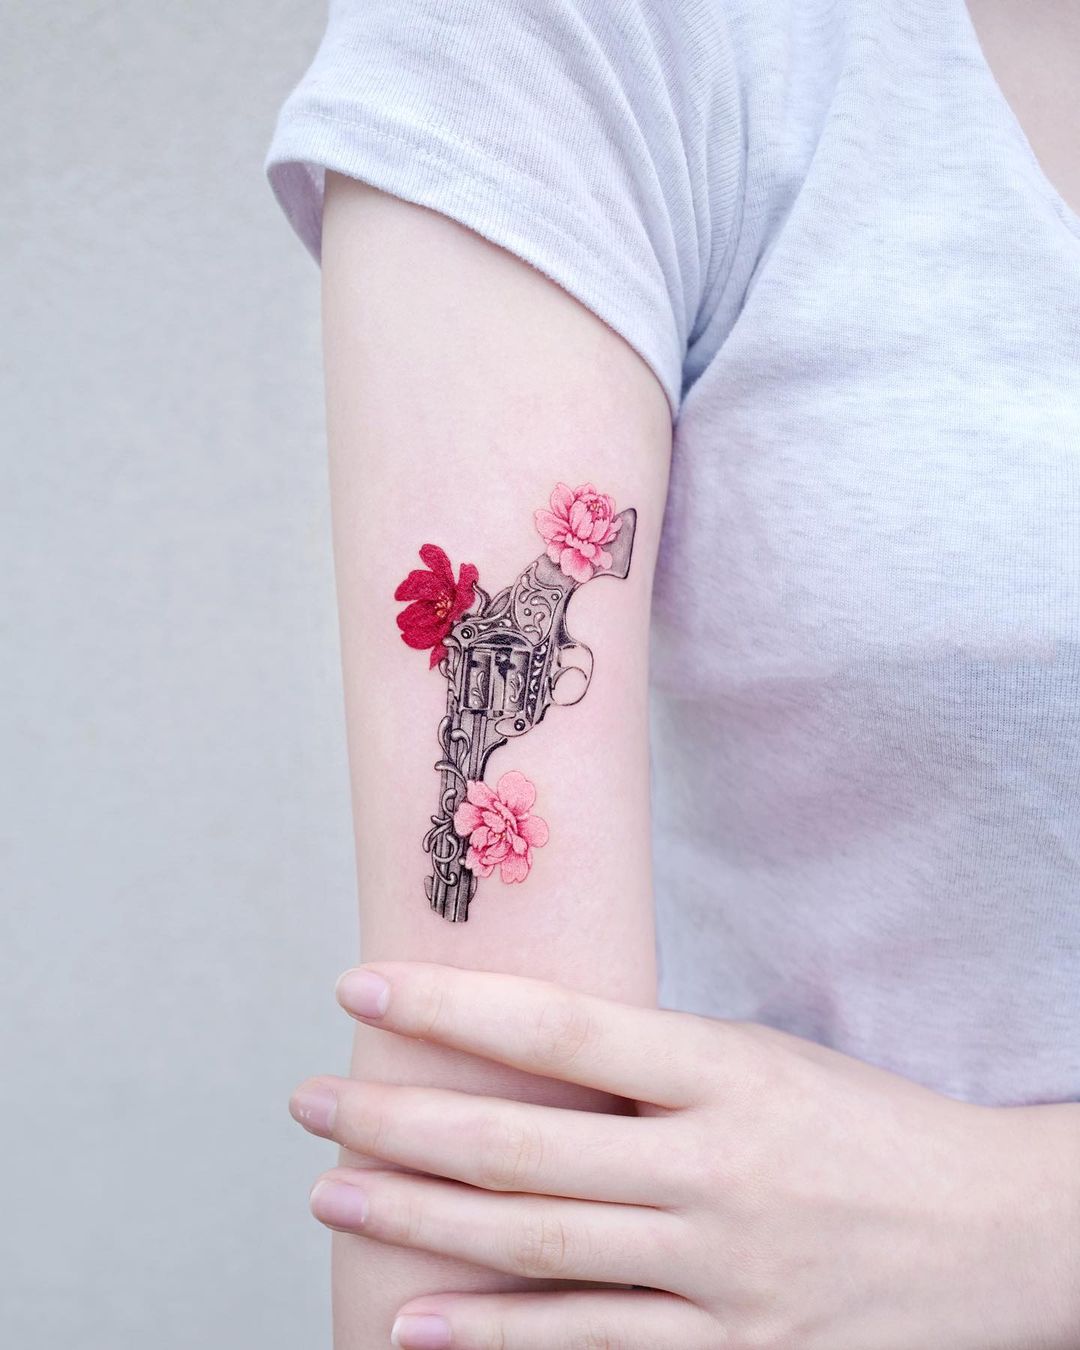 Greatest Tattoo Ideas For Women In 2021 images 30